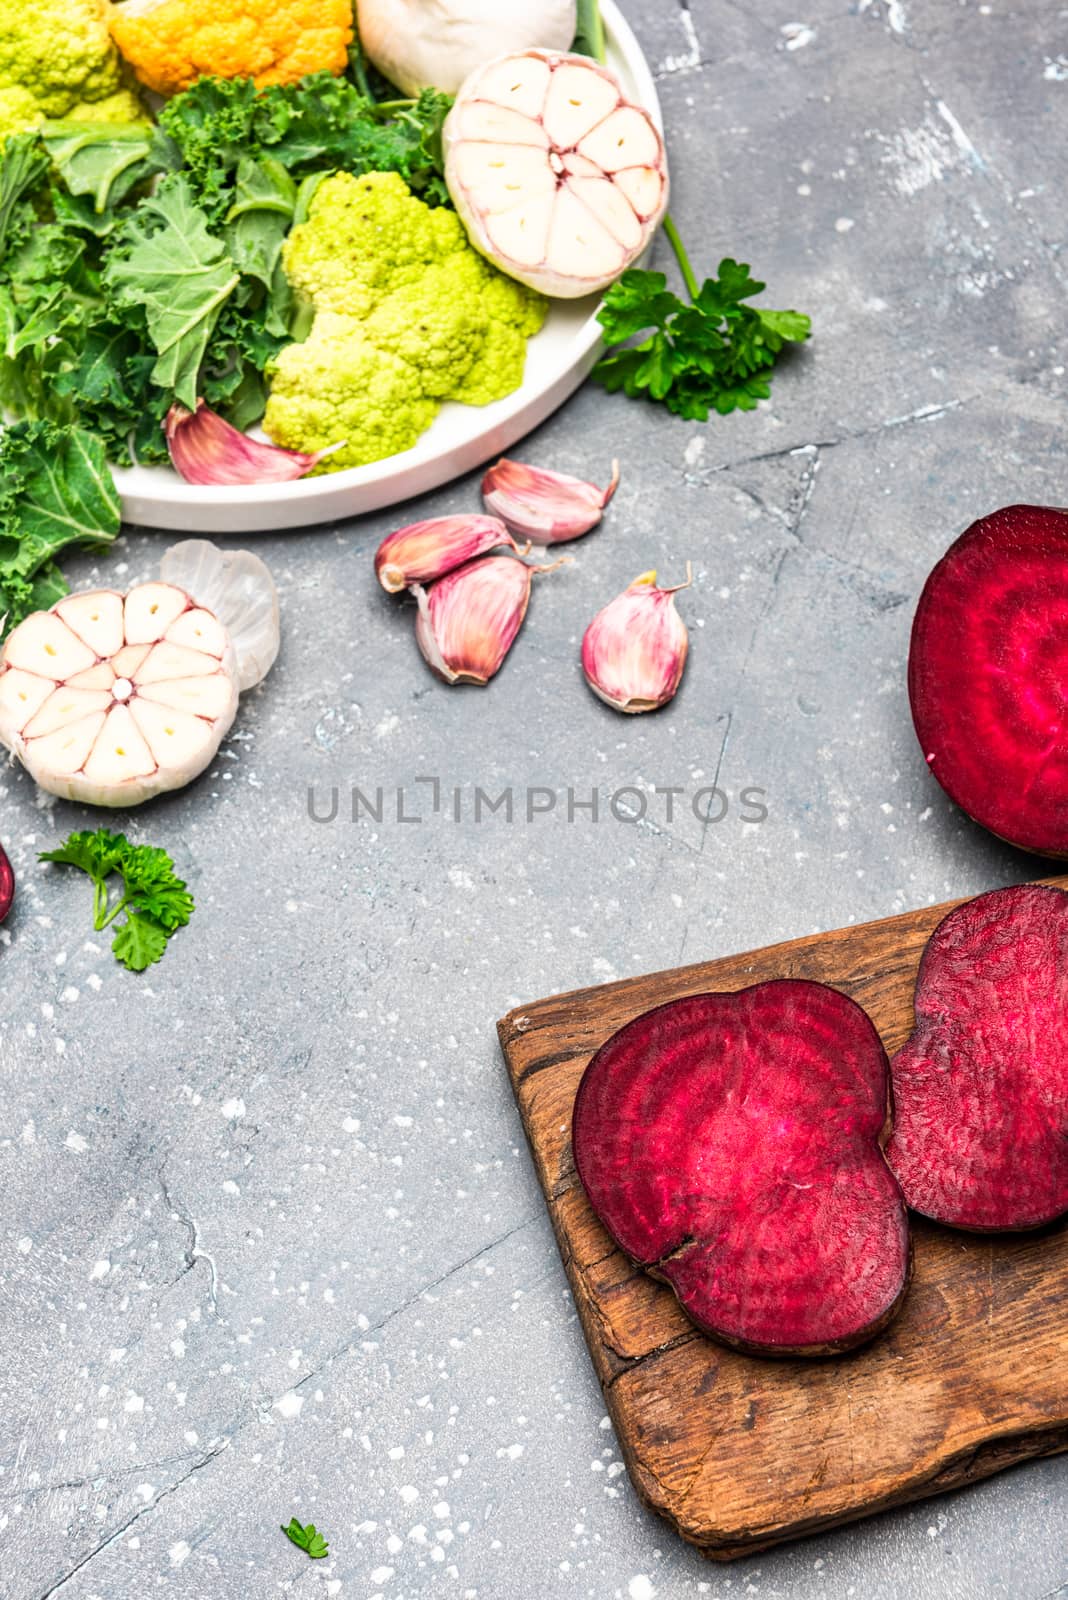 Clean Eating and Organic Vegetables Concept. Food Background. Fl by merc67